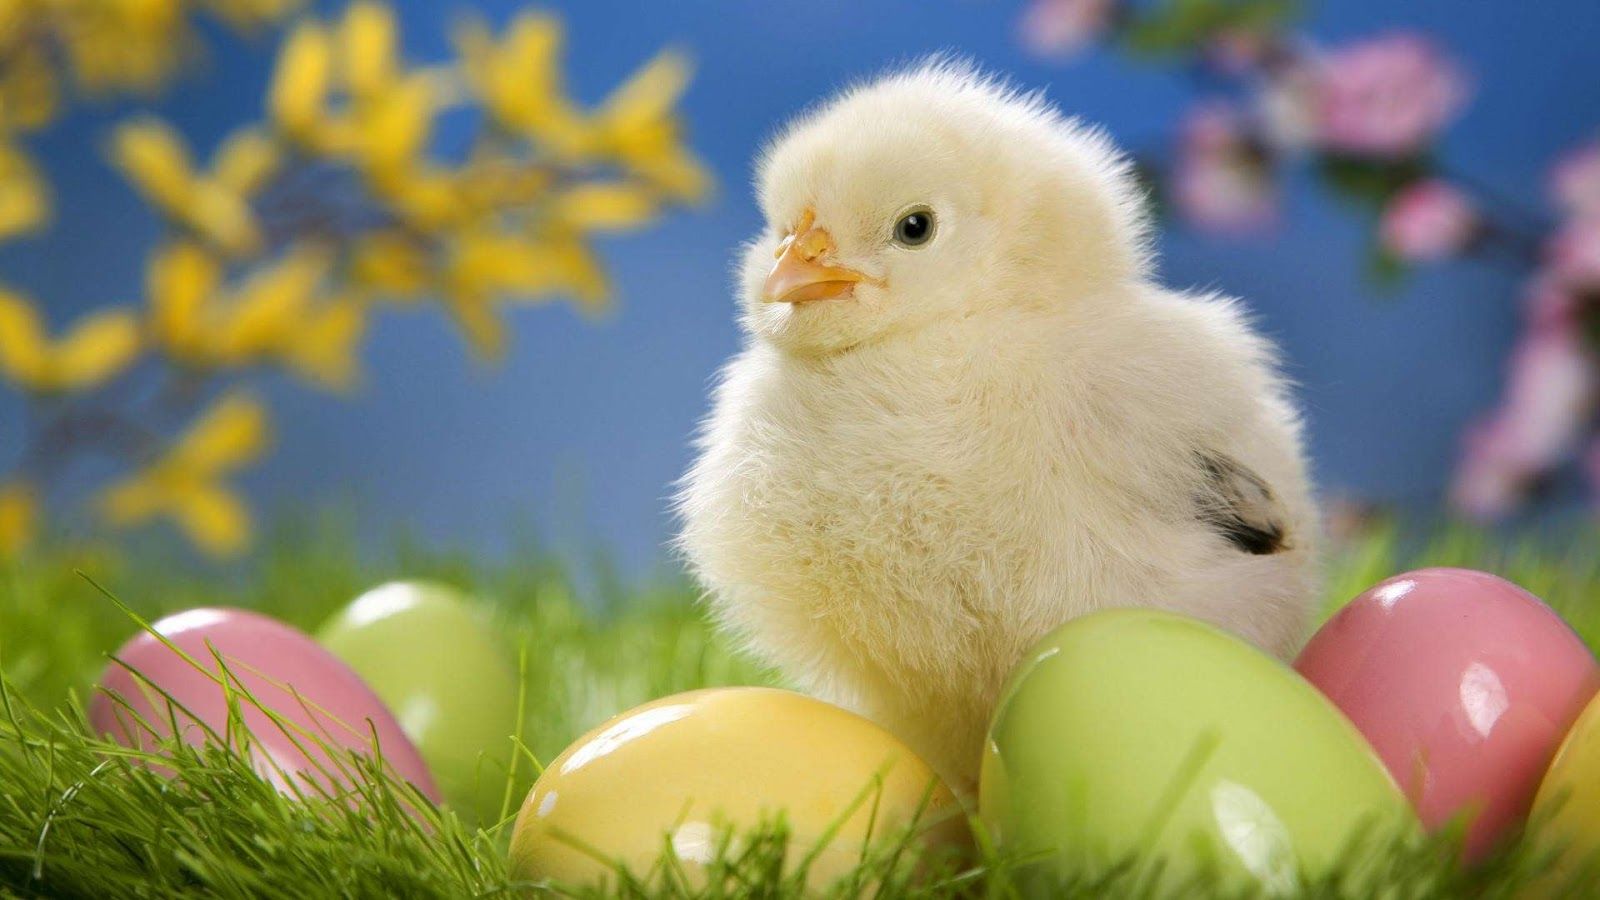 Galerry Wallpaper: Free Happy and Cute Easter wallpaper